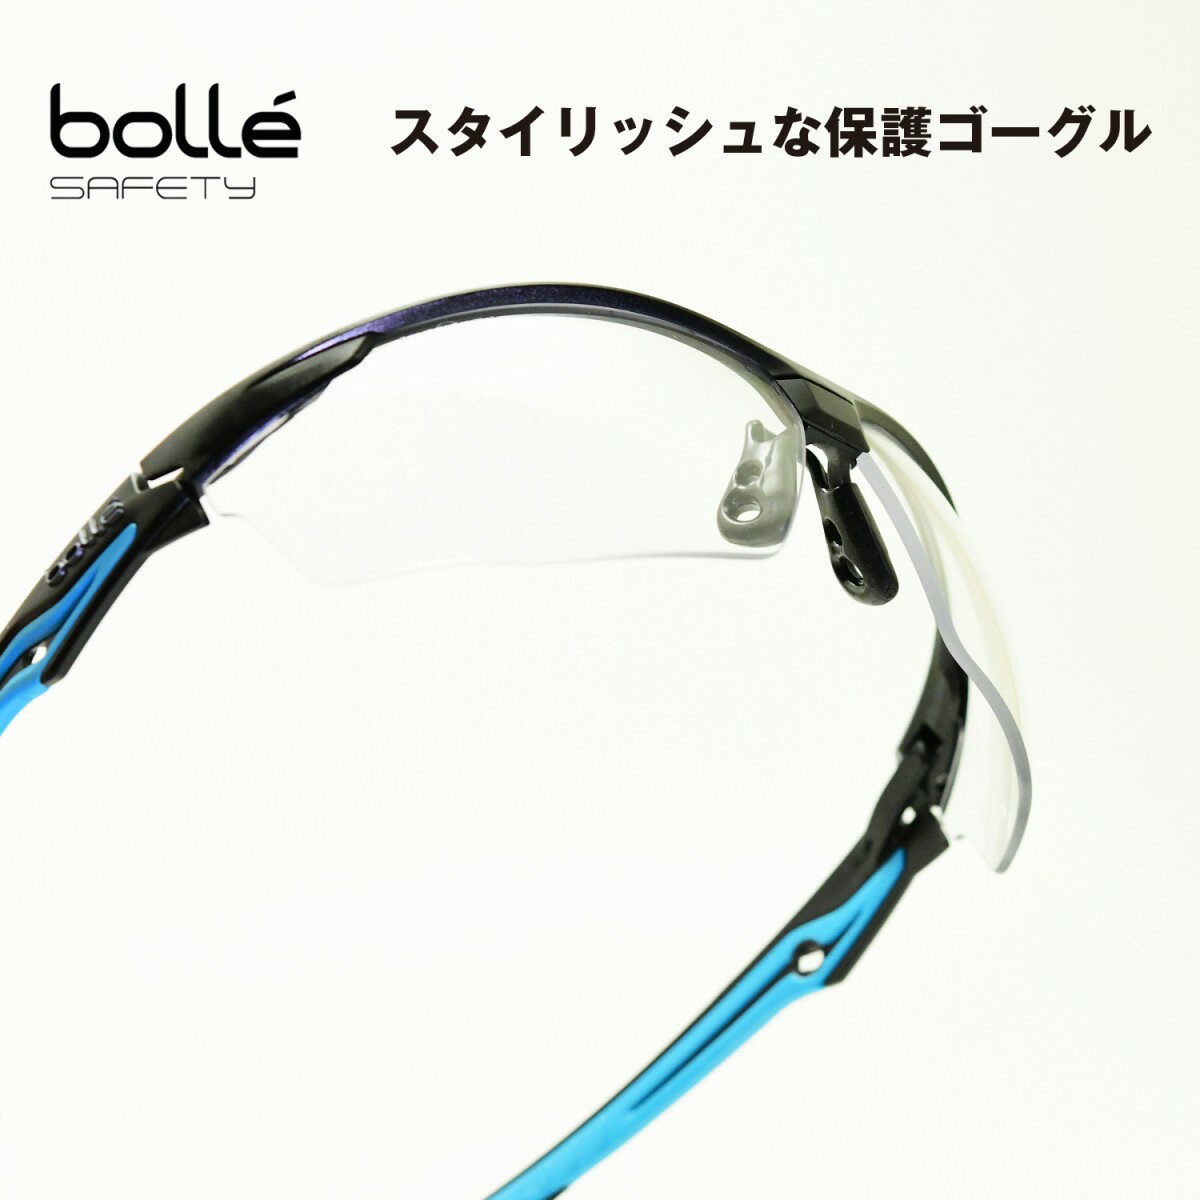 bolle SAFETY ボレーセイフティTRYON トライオン クリアレンズ 1